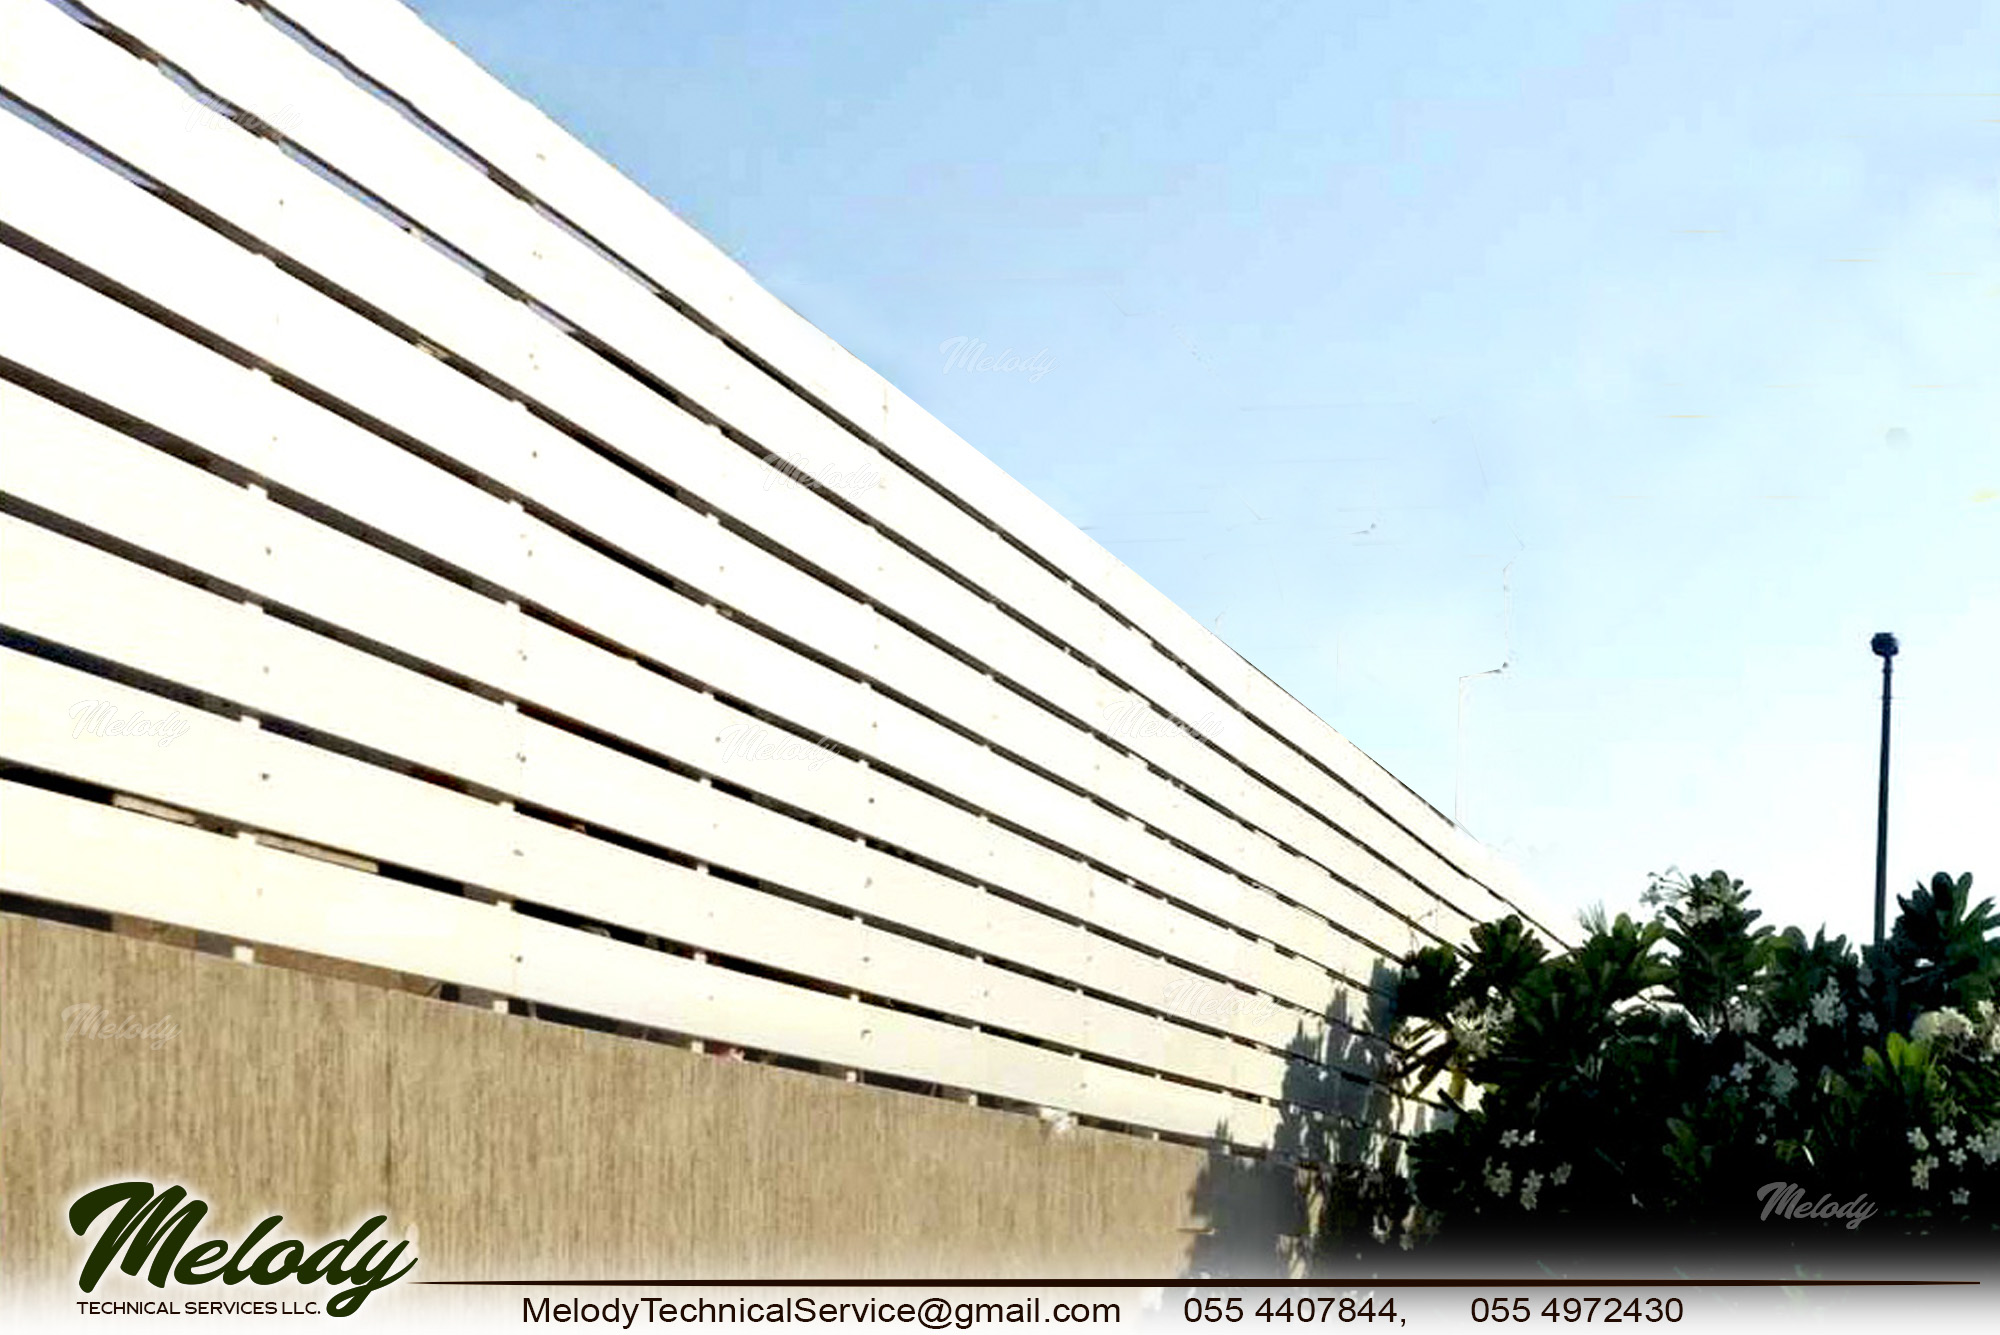 WPC Fence Manufacturer, WPC Fence In Dubai (1).jpg